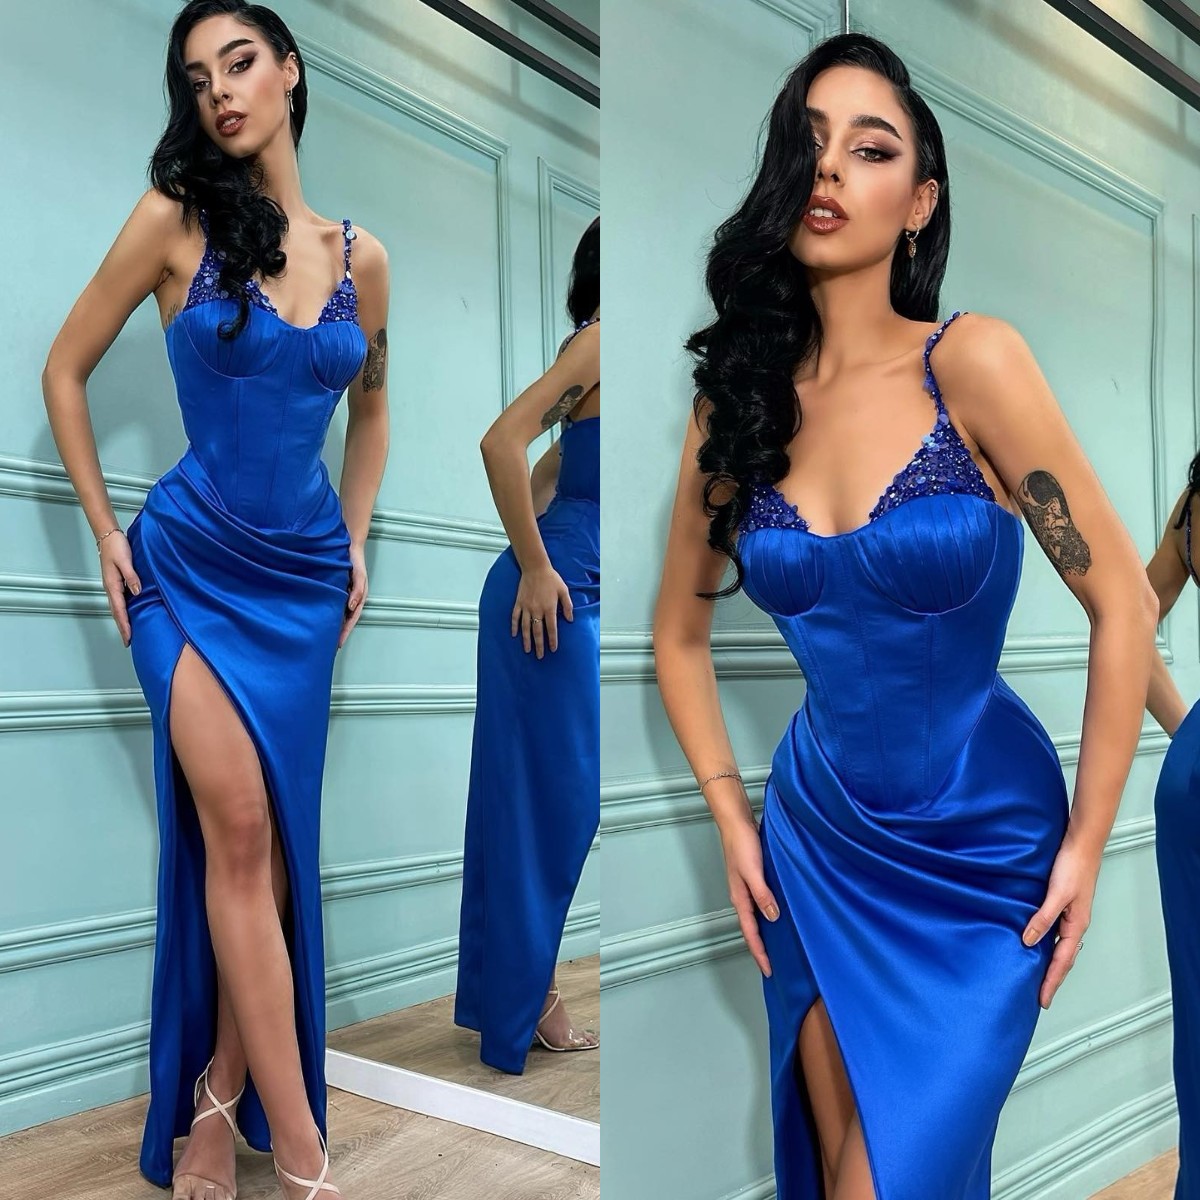 

Sexy Royal Blue Prom Dresses Sequins Straps Evening Gowns Slit Pleats Formal Red Carpet Long Special Occasion dress, Customize